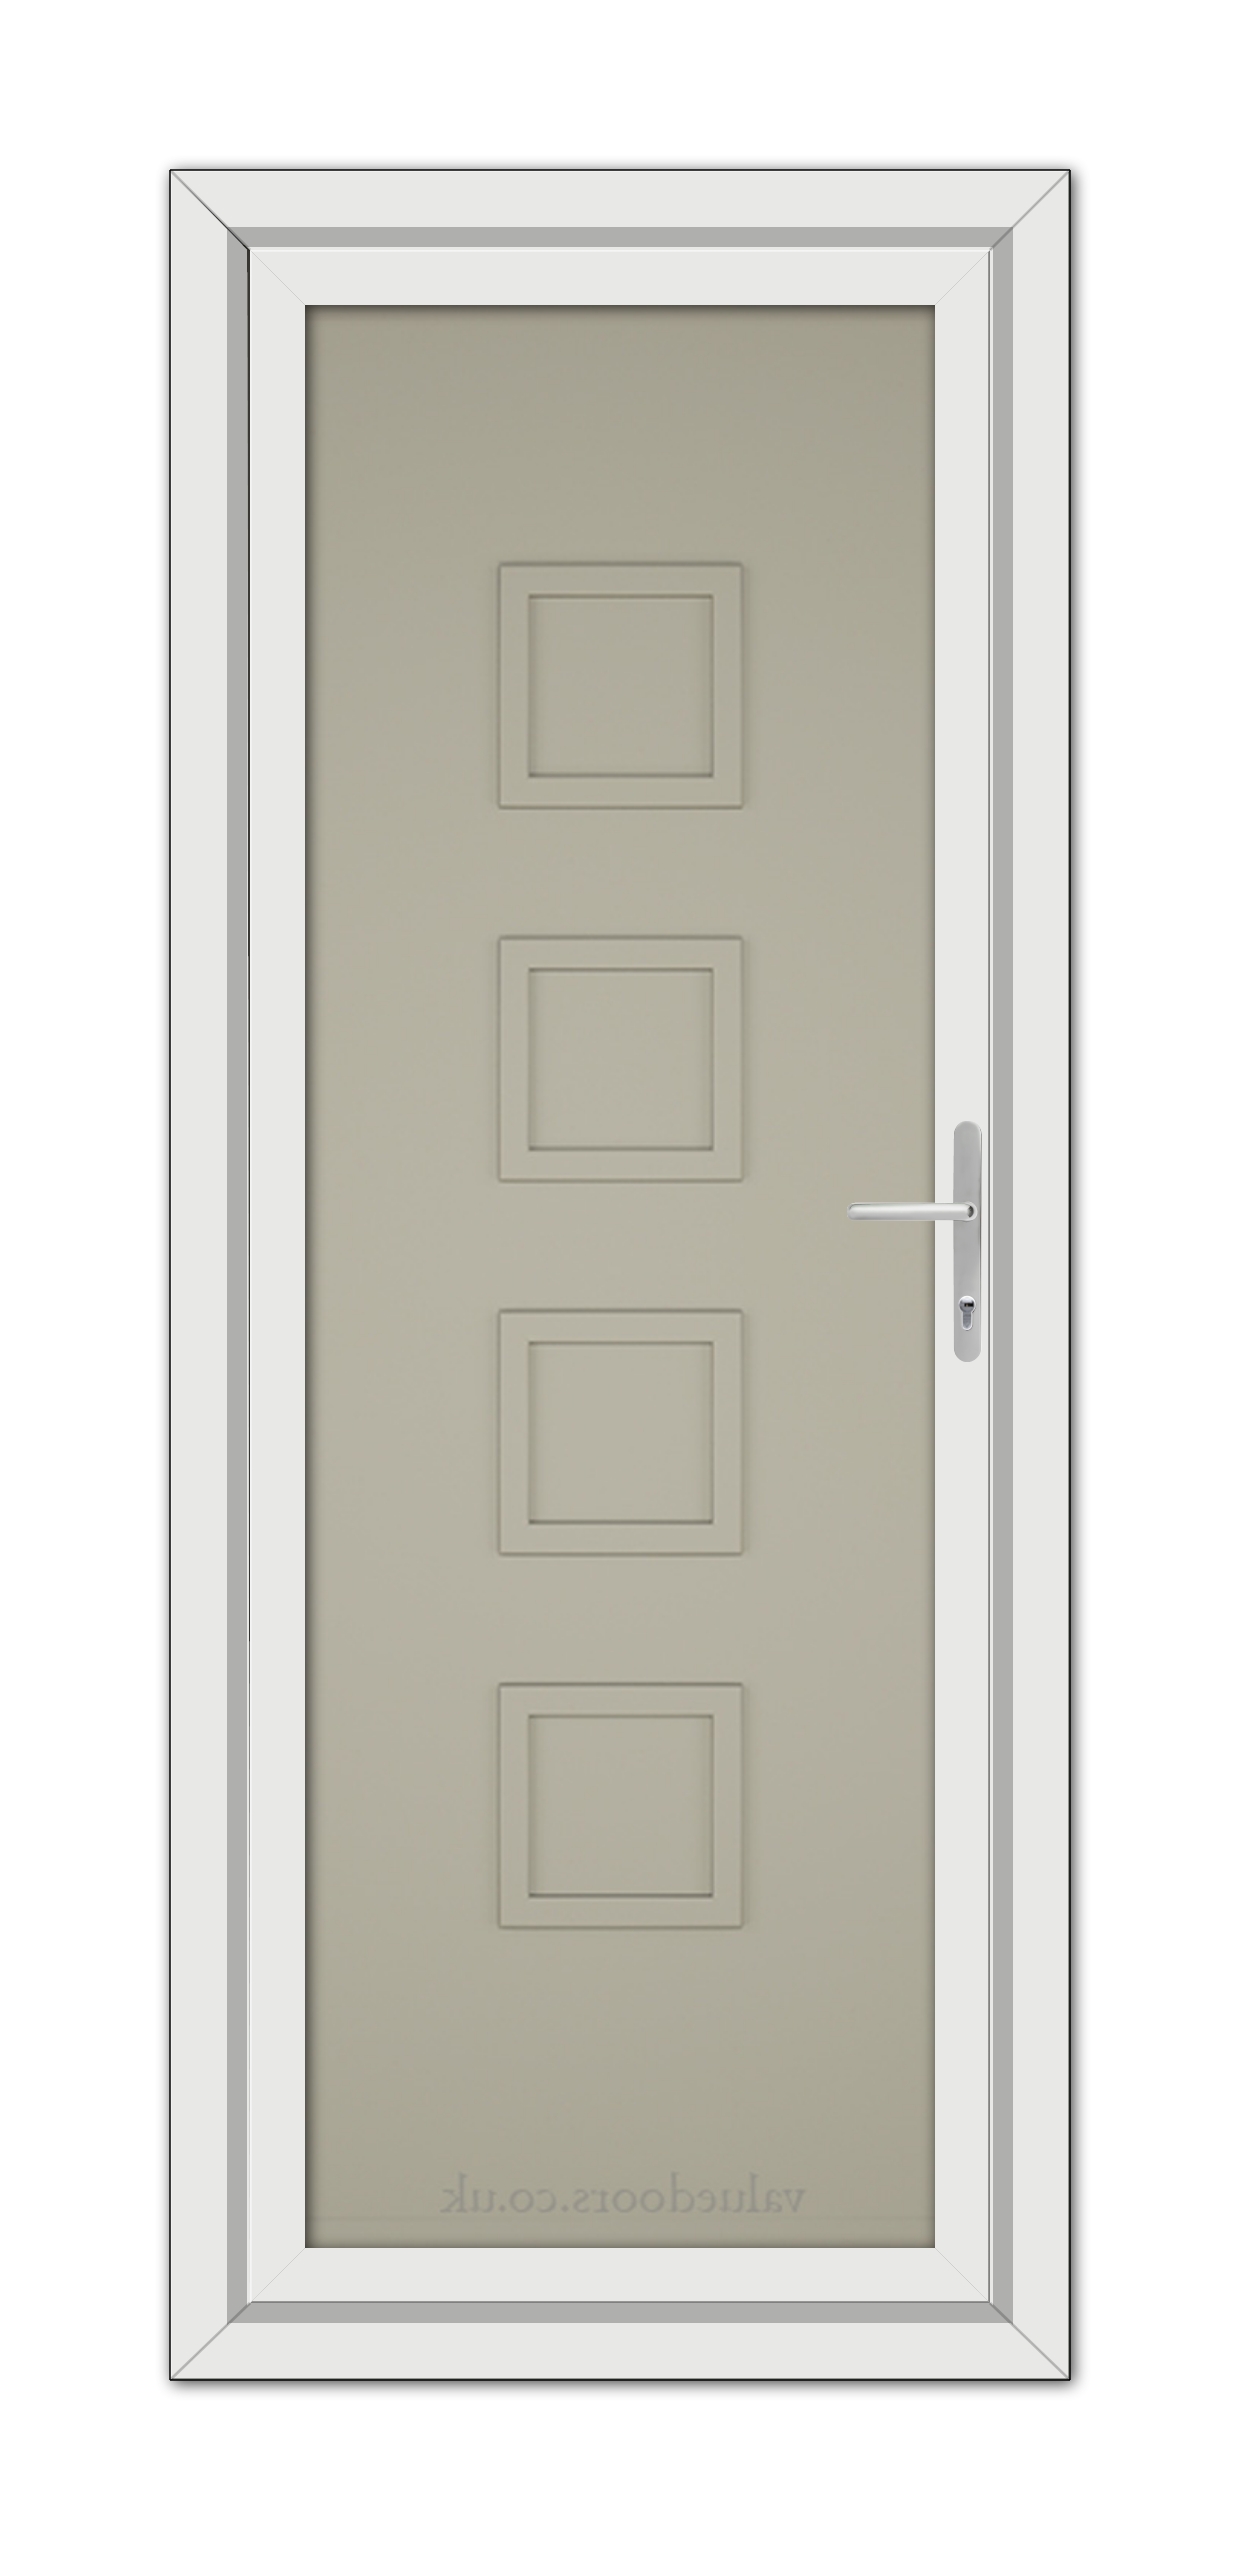 A modern Pebble Grey 5034 Solid uPVC door featuring four square panels and a silver handle, set within a white frame.